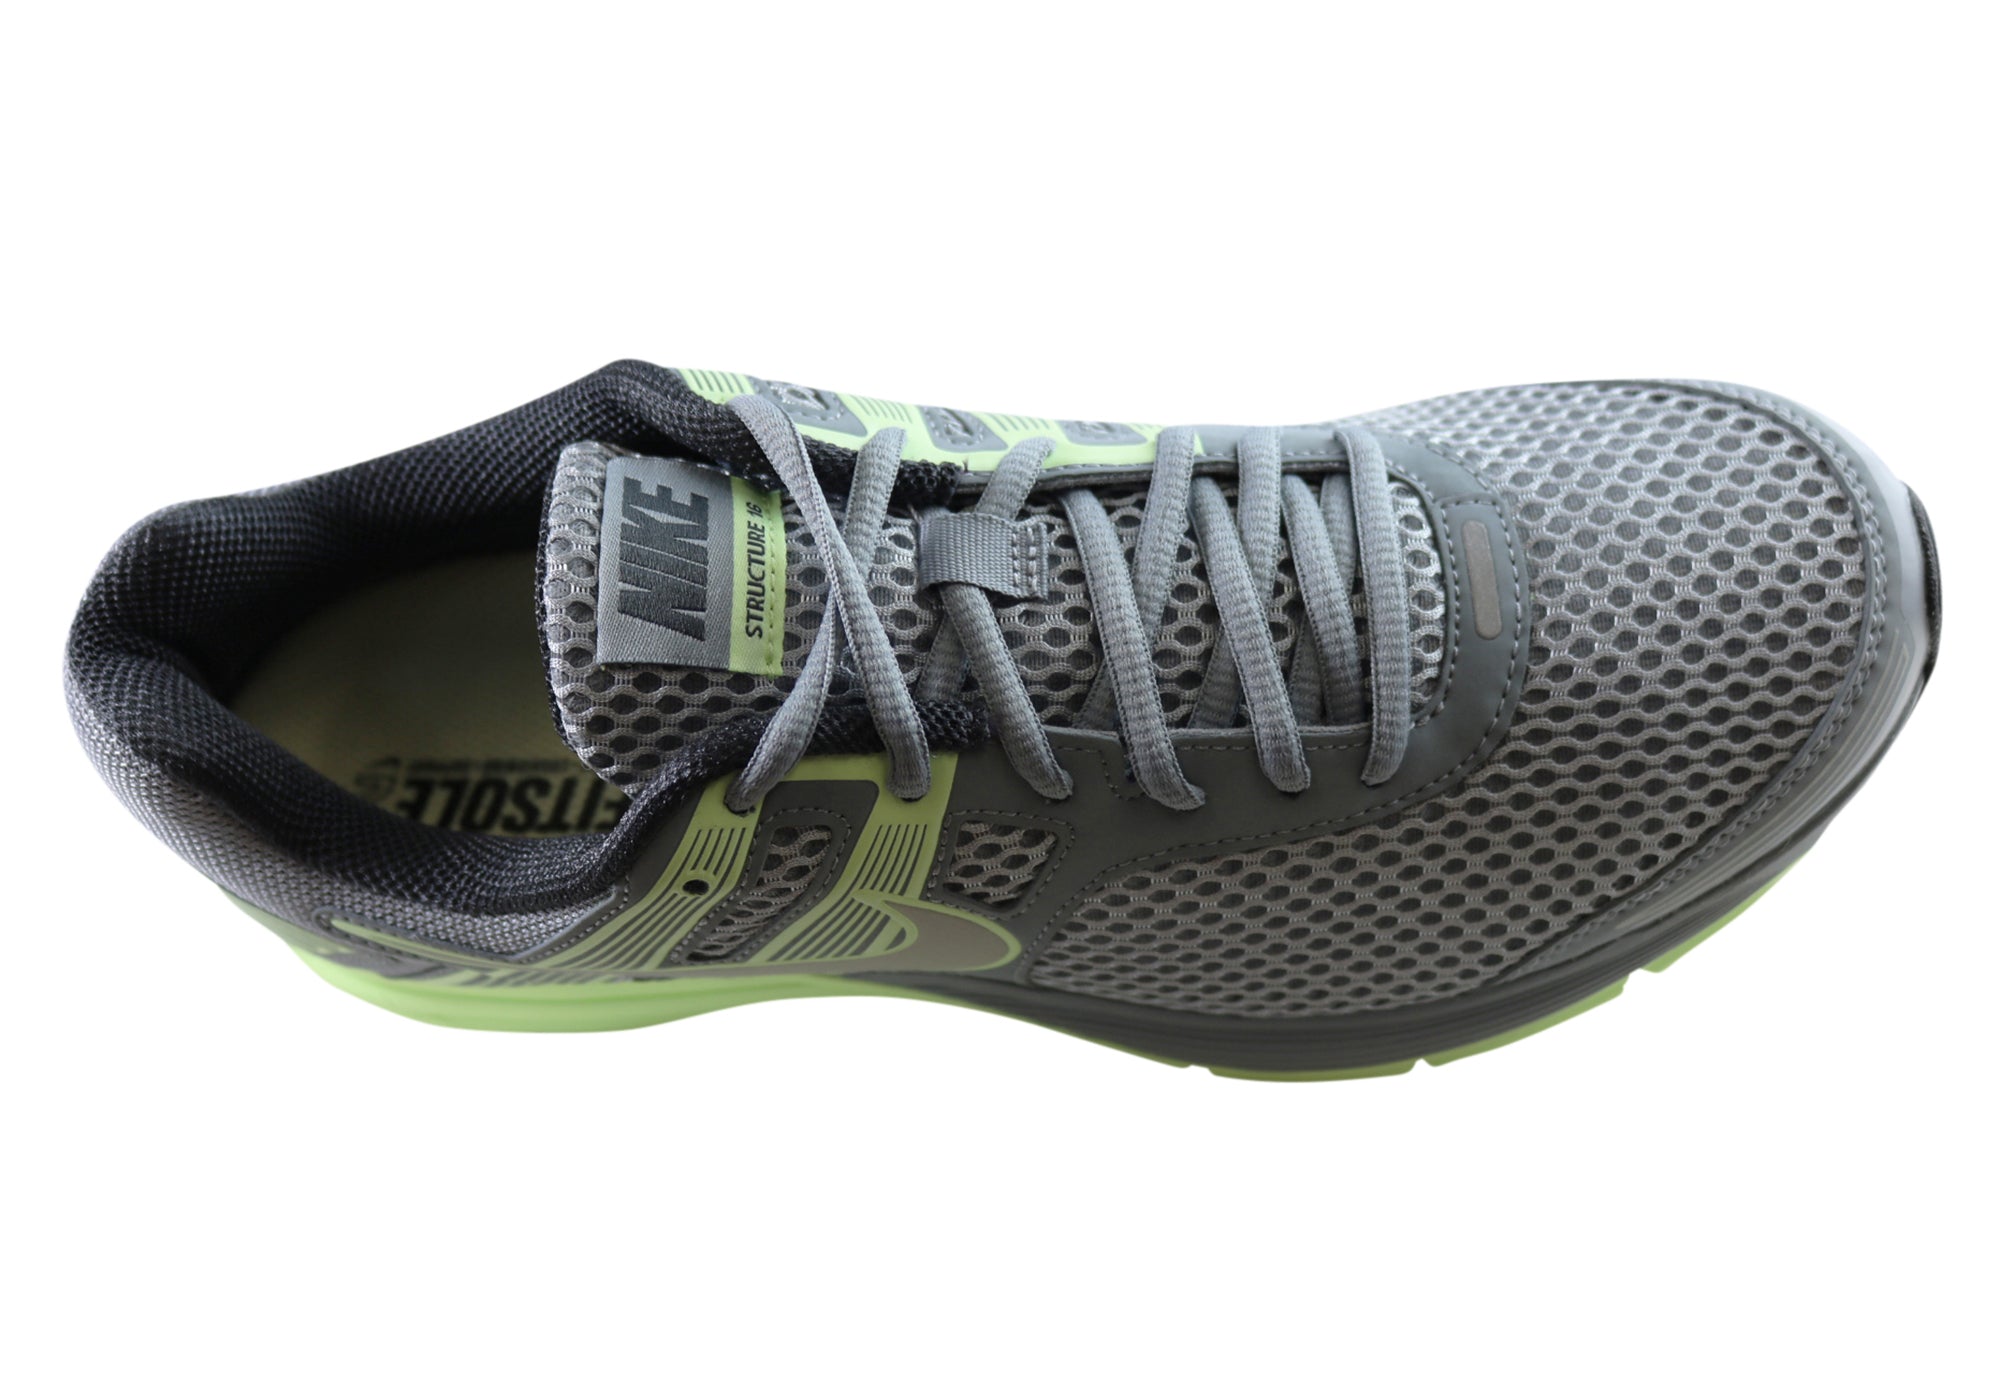 women's athletic shoes narrow width